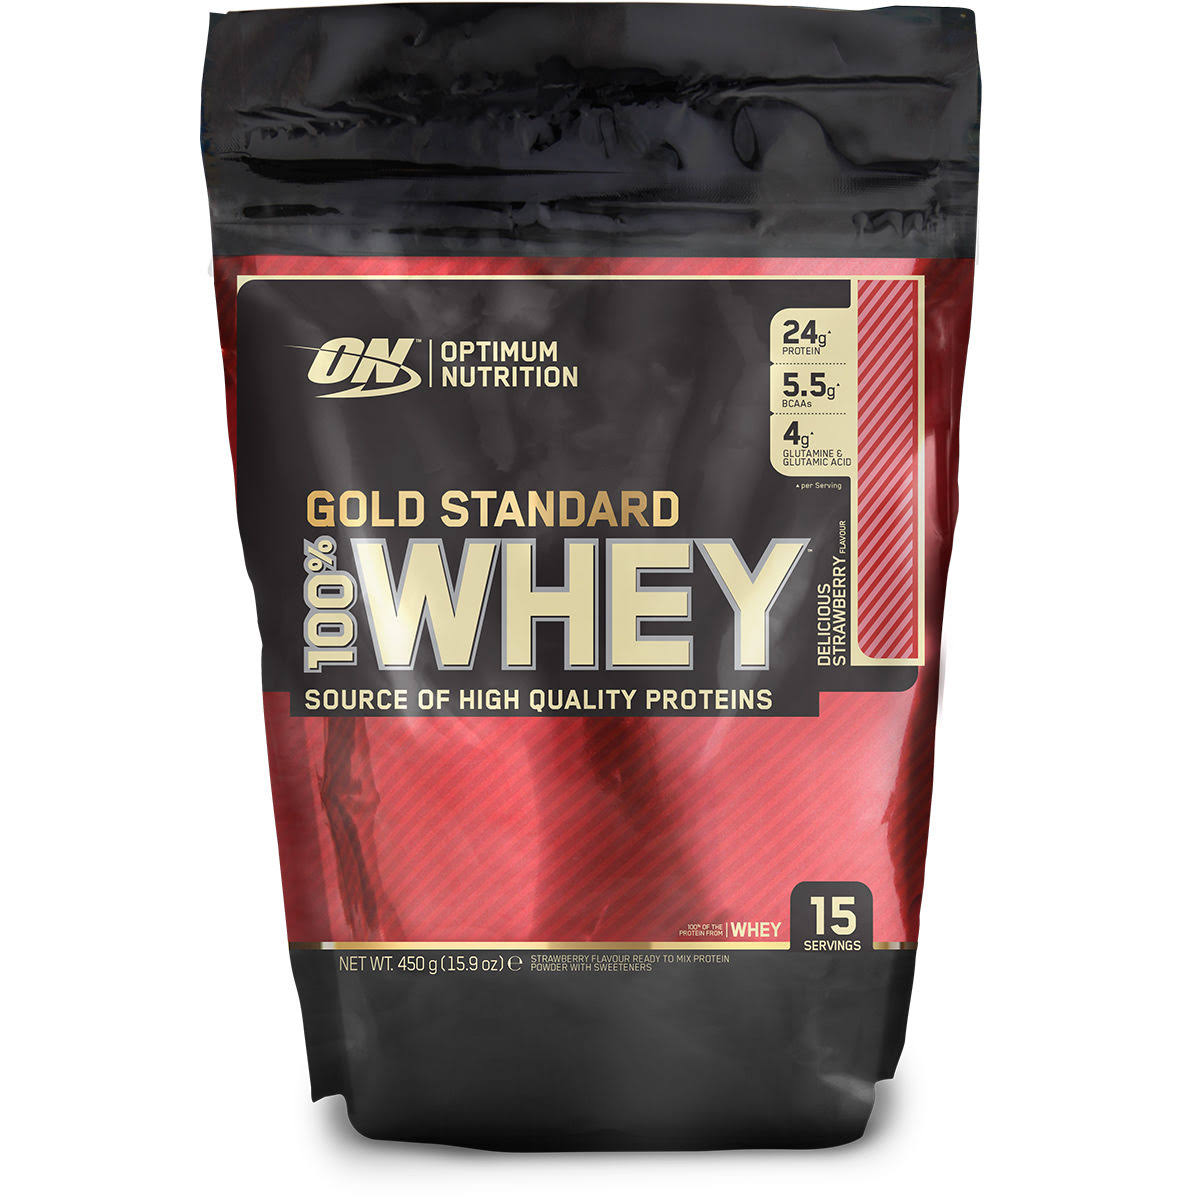 Optimum Nutrition Gold Standard 100 Percent Whey Delicious Dietary Supplement - Strawberry Flavor, 450g